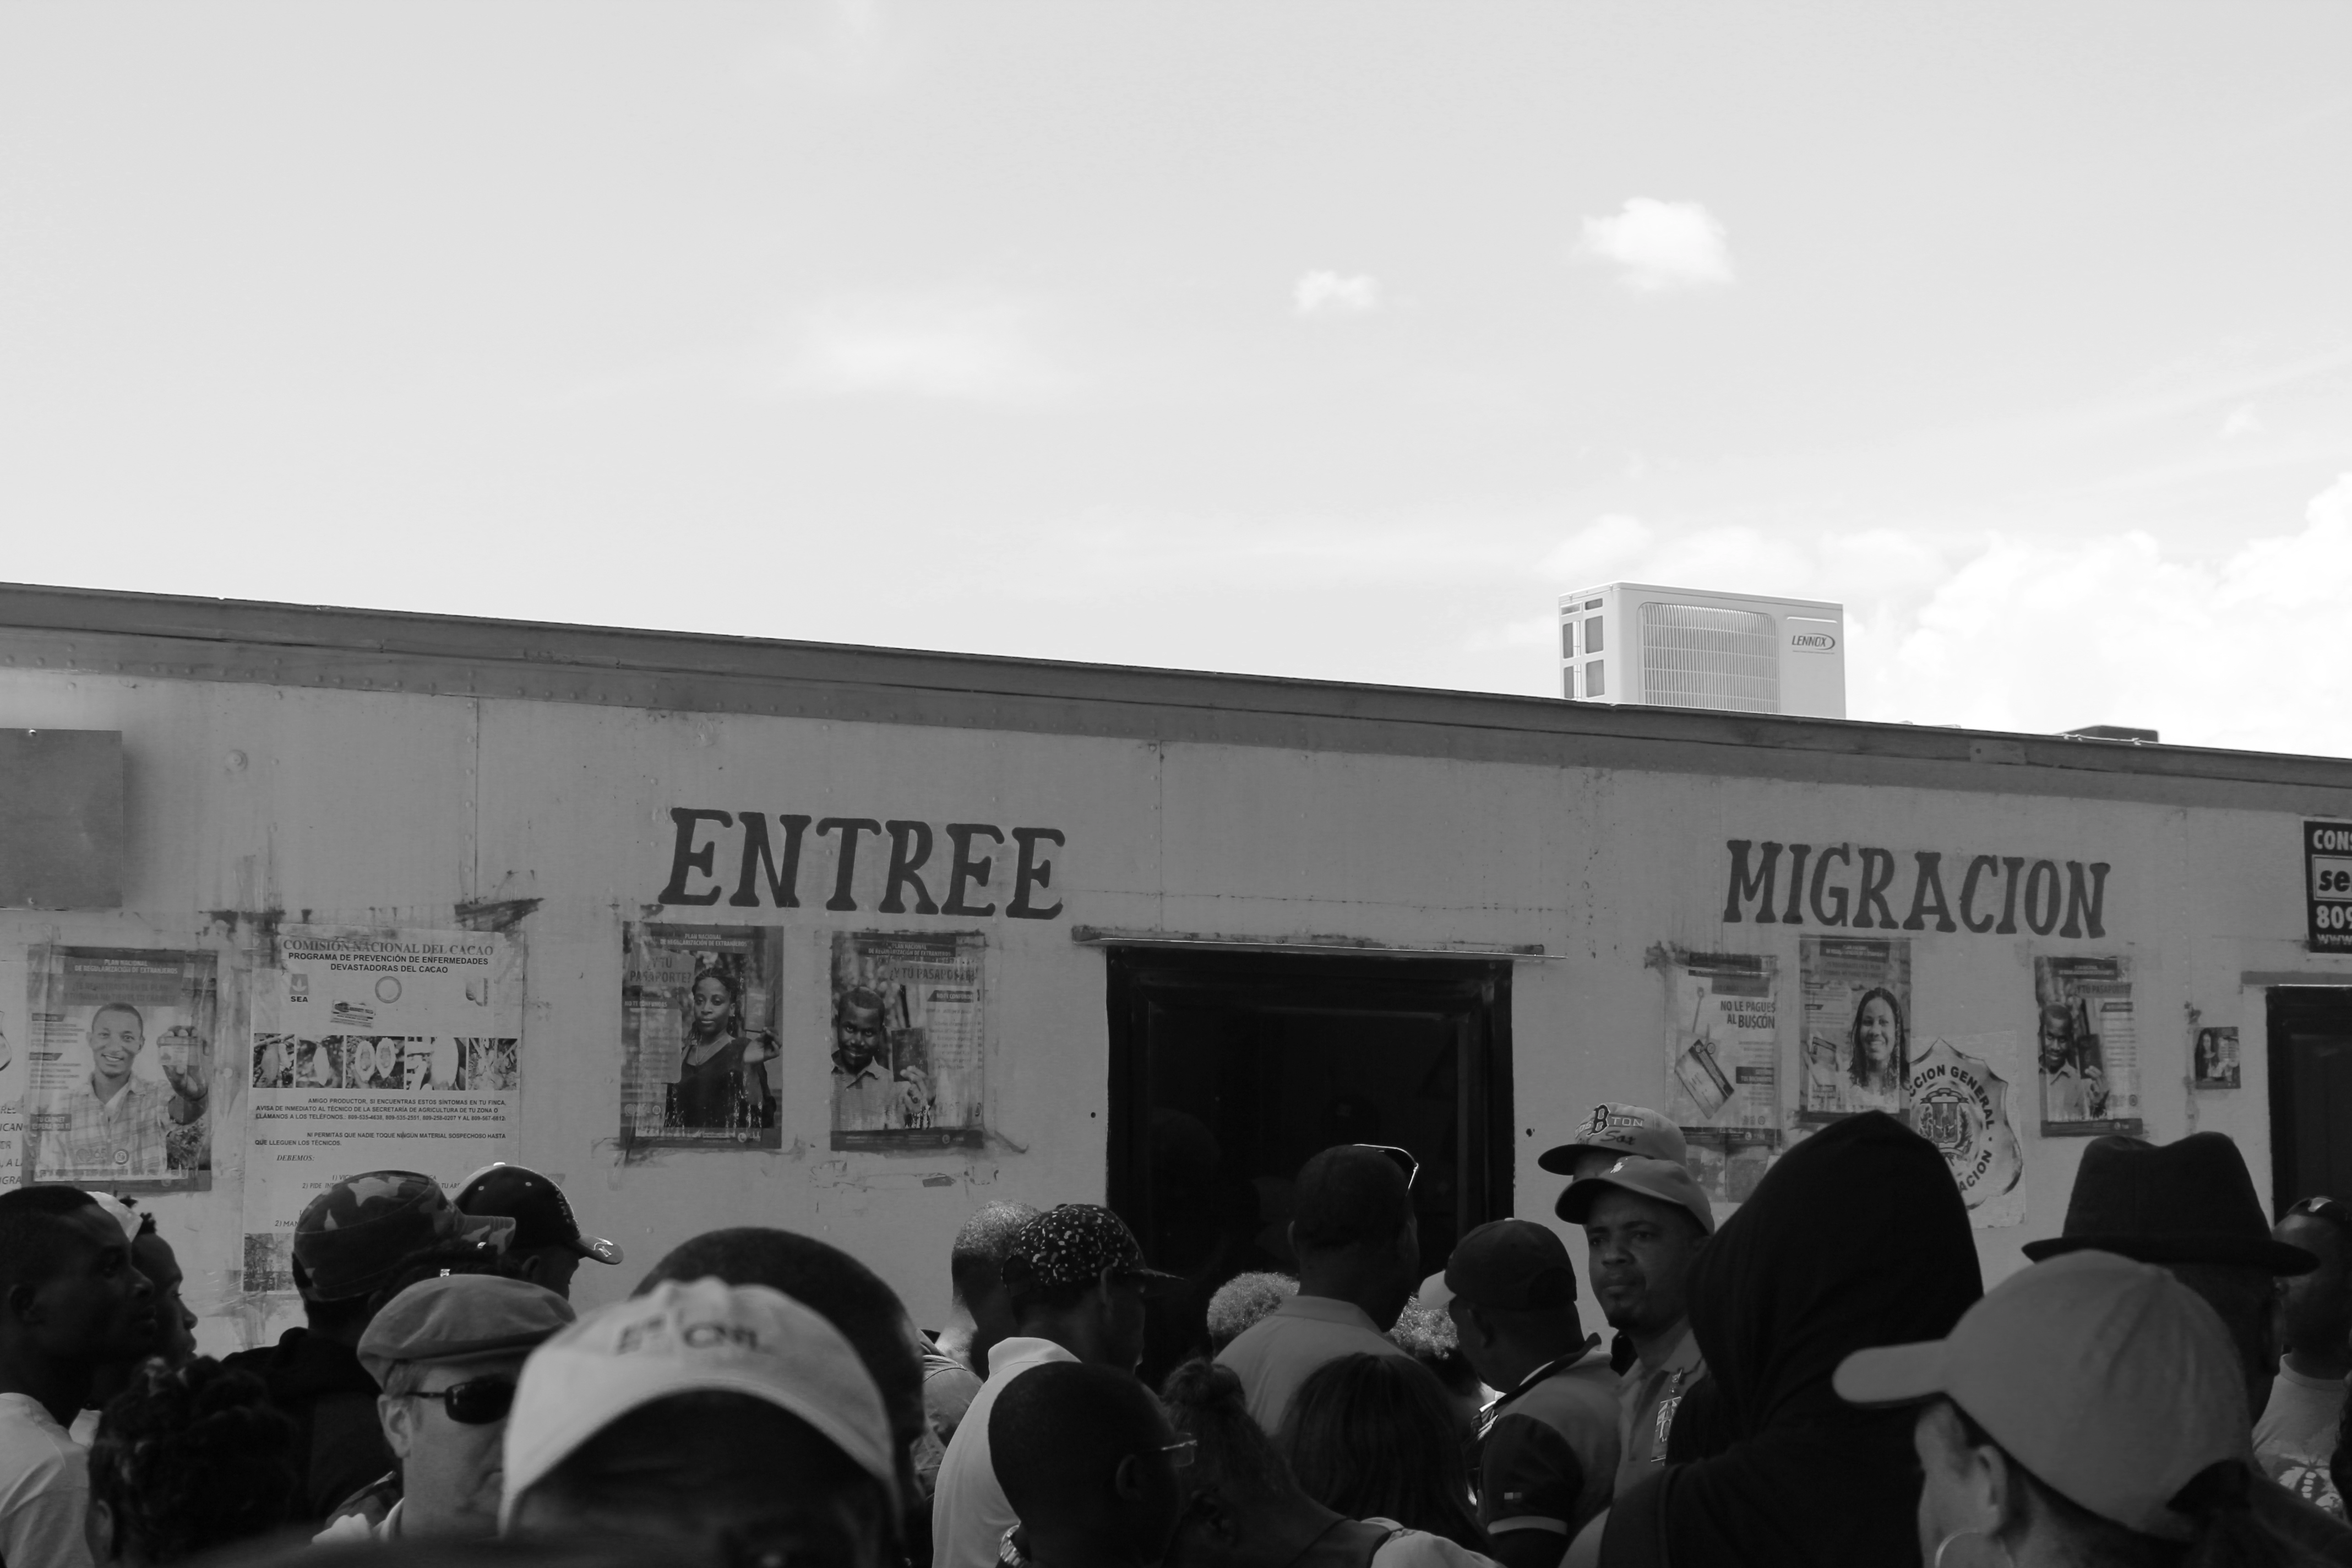 Tourists and Haitian migrants waiting in line at the migration processing center to enter the Dominican Republic.